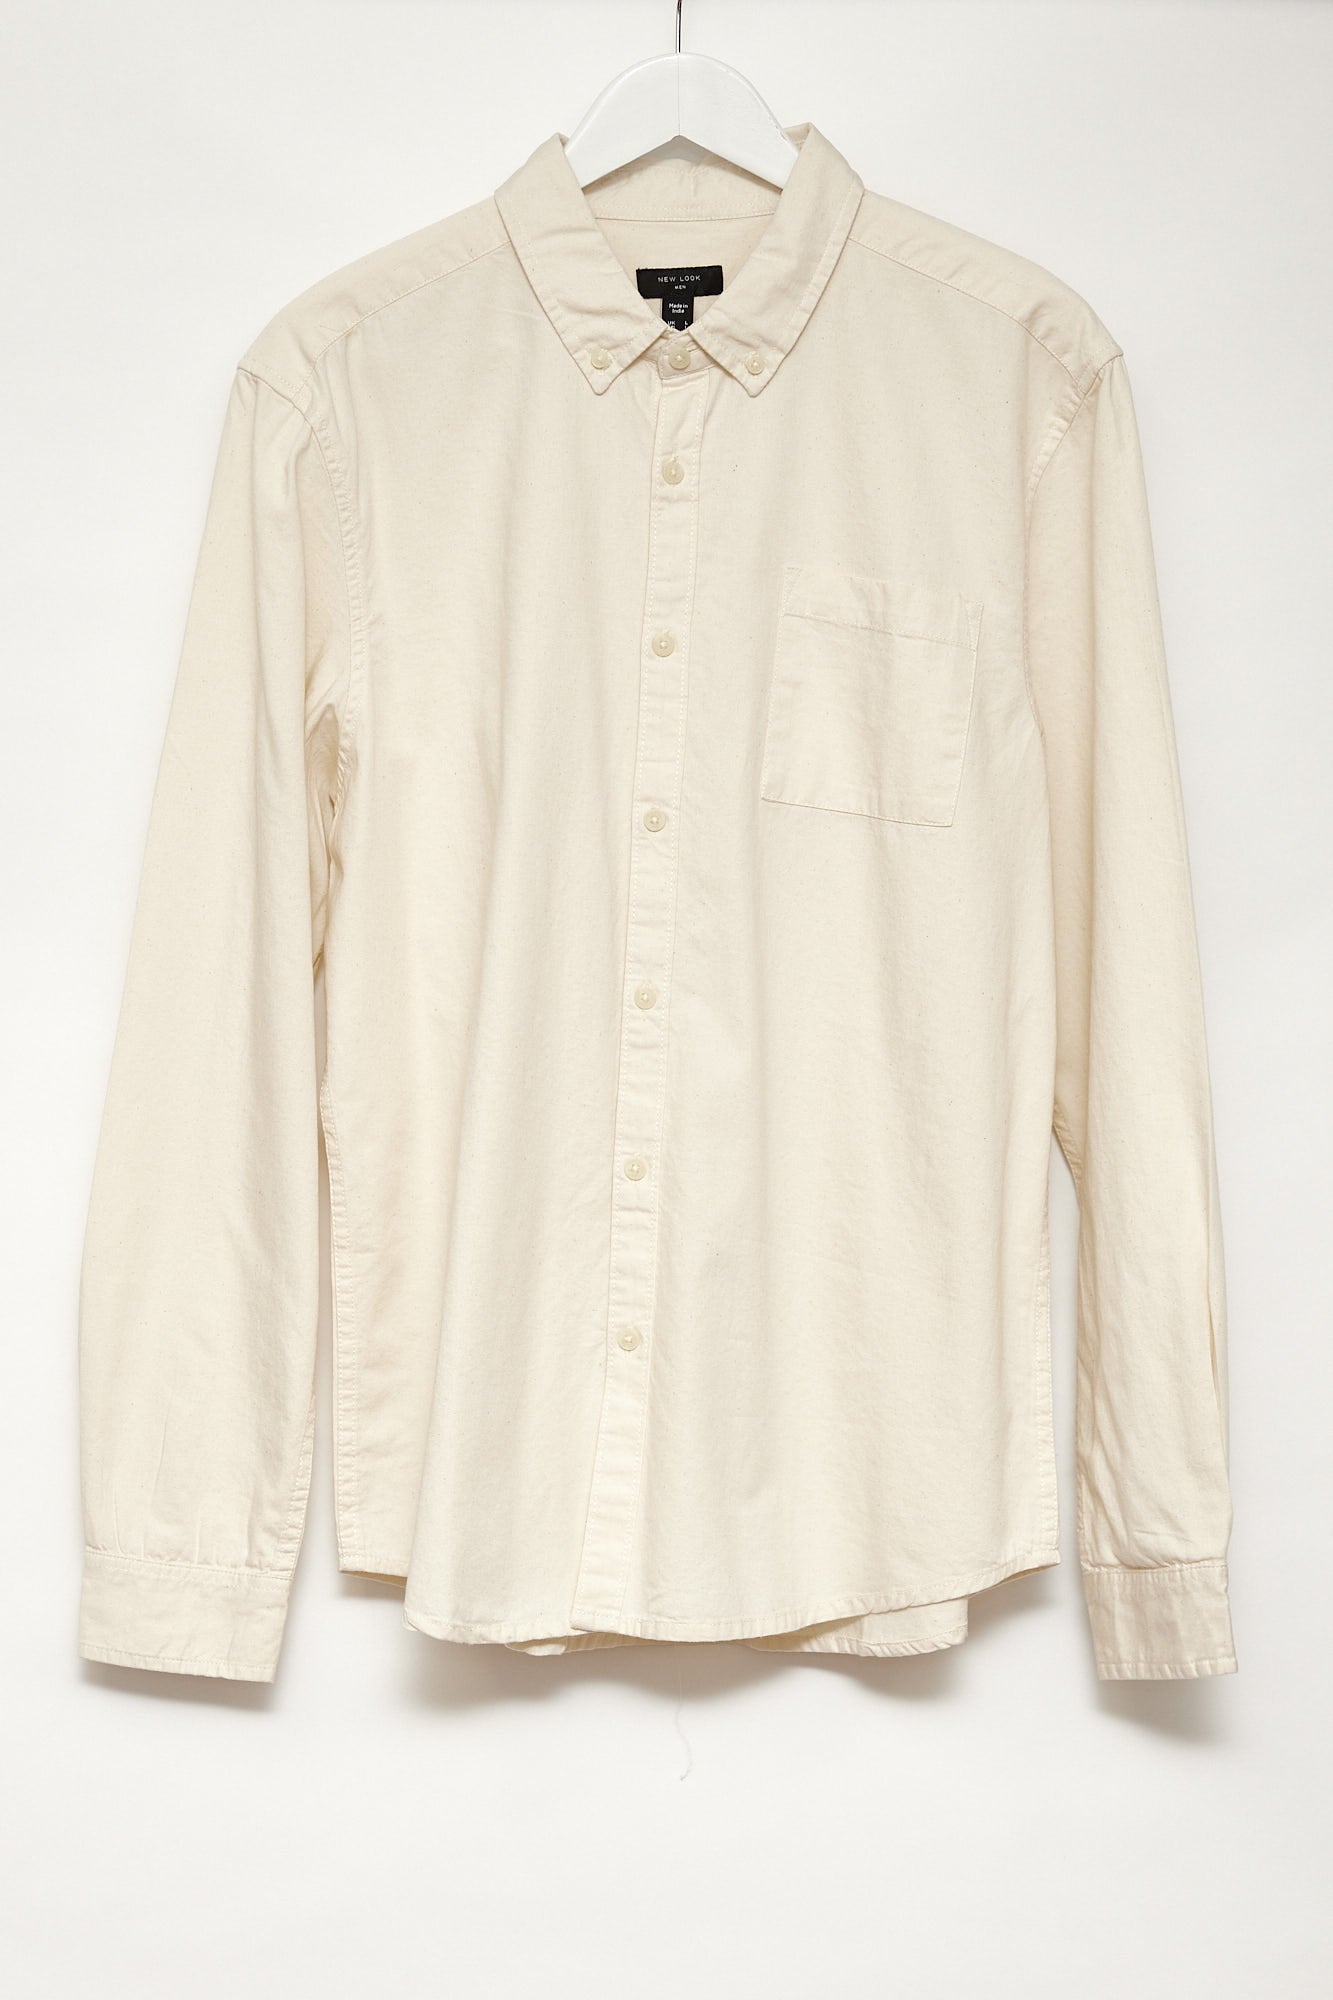 Mens New Look Cream Oxford shirt size large